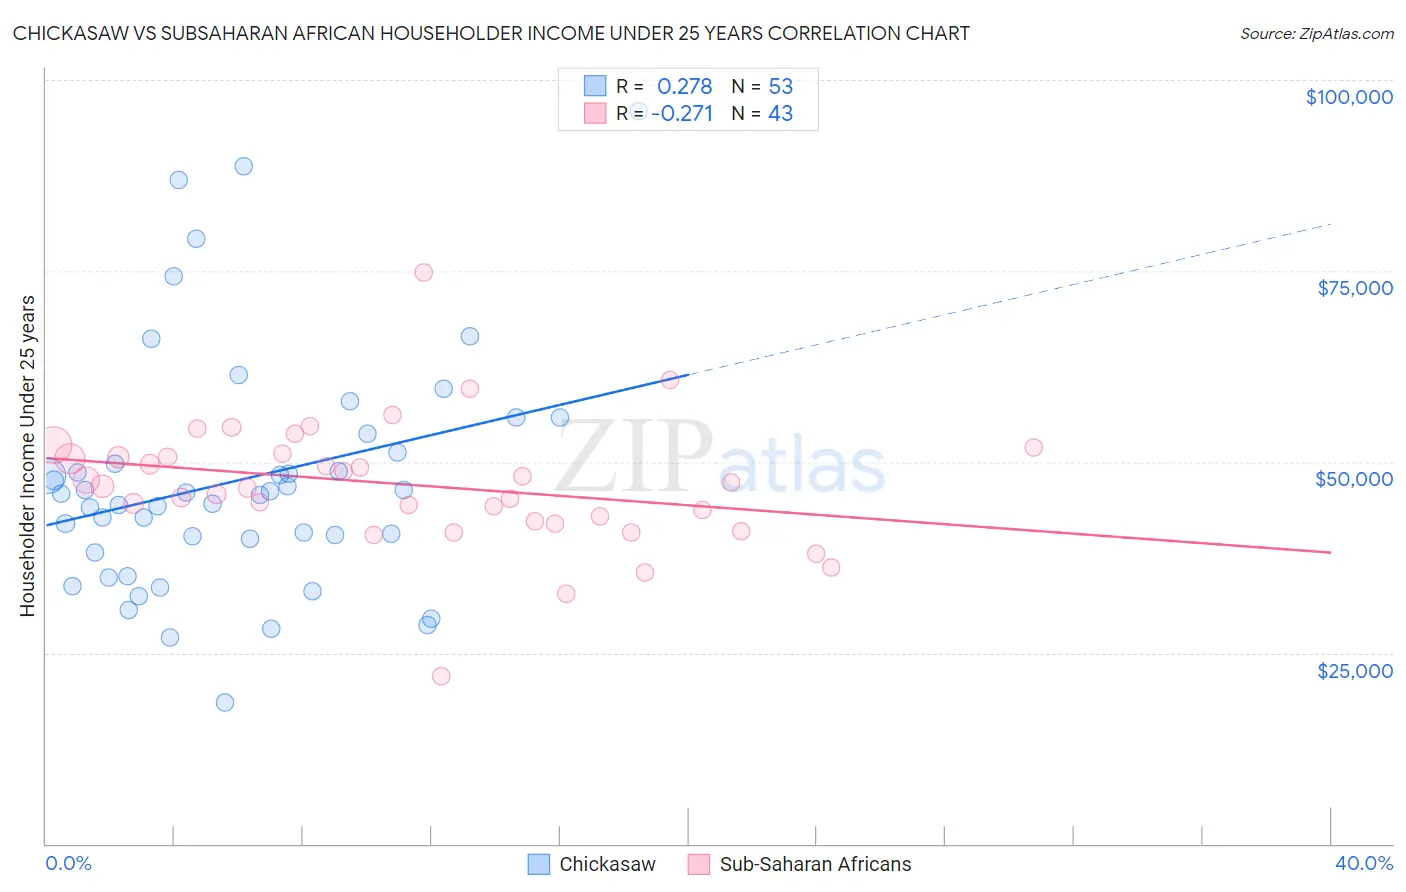 Chickasaw vs Subsaharan African Householder Income Under 25 years